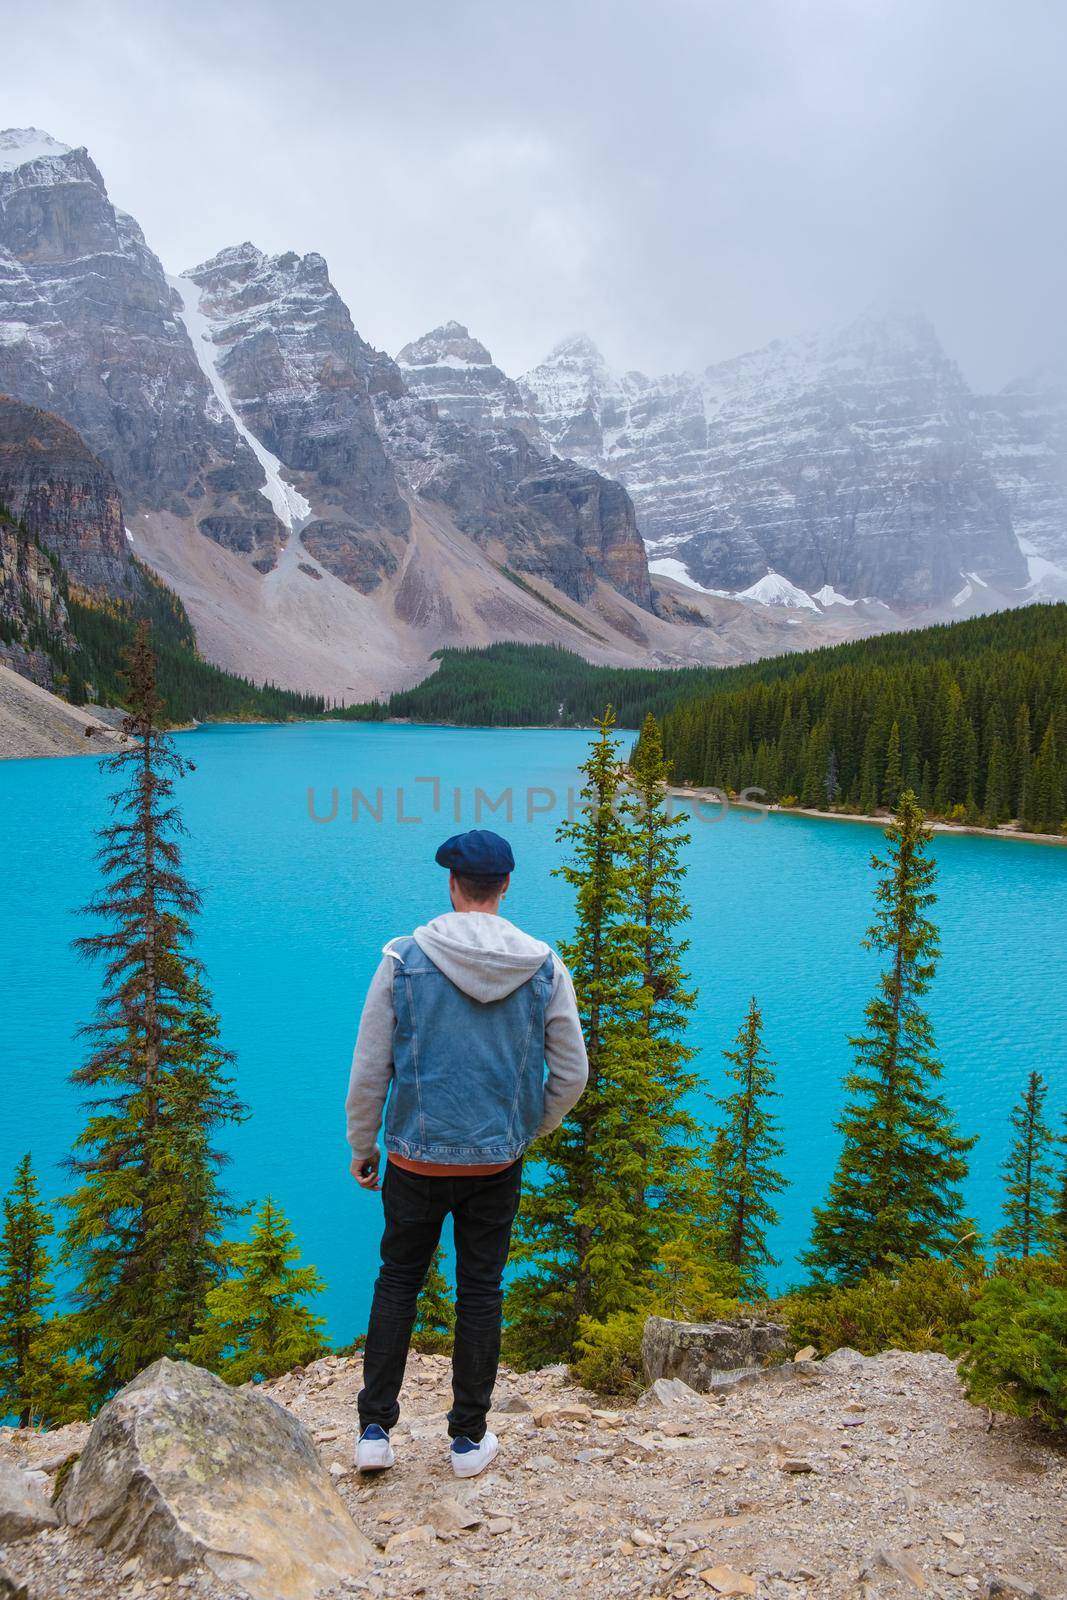 Lake moraine during a cold snowy day in Autumn in Canada, Beautiful turquoise waters of the Moraine lake with snow. Banff National Park of Canada Canadian Rockies, young men standing by the lake